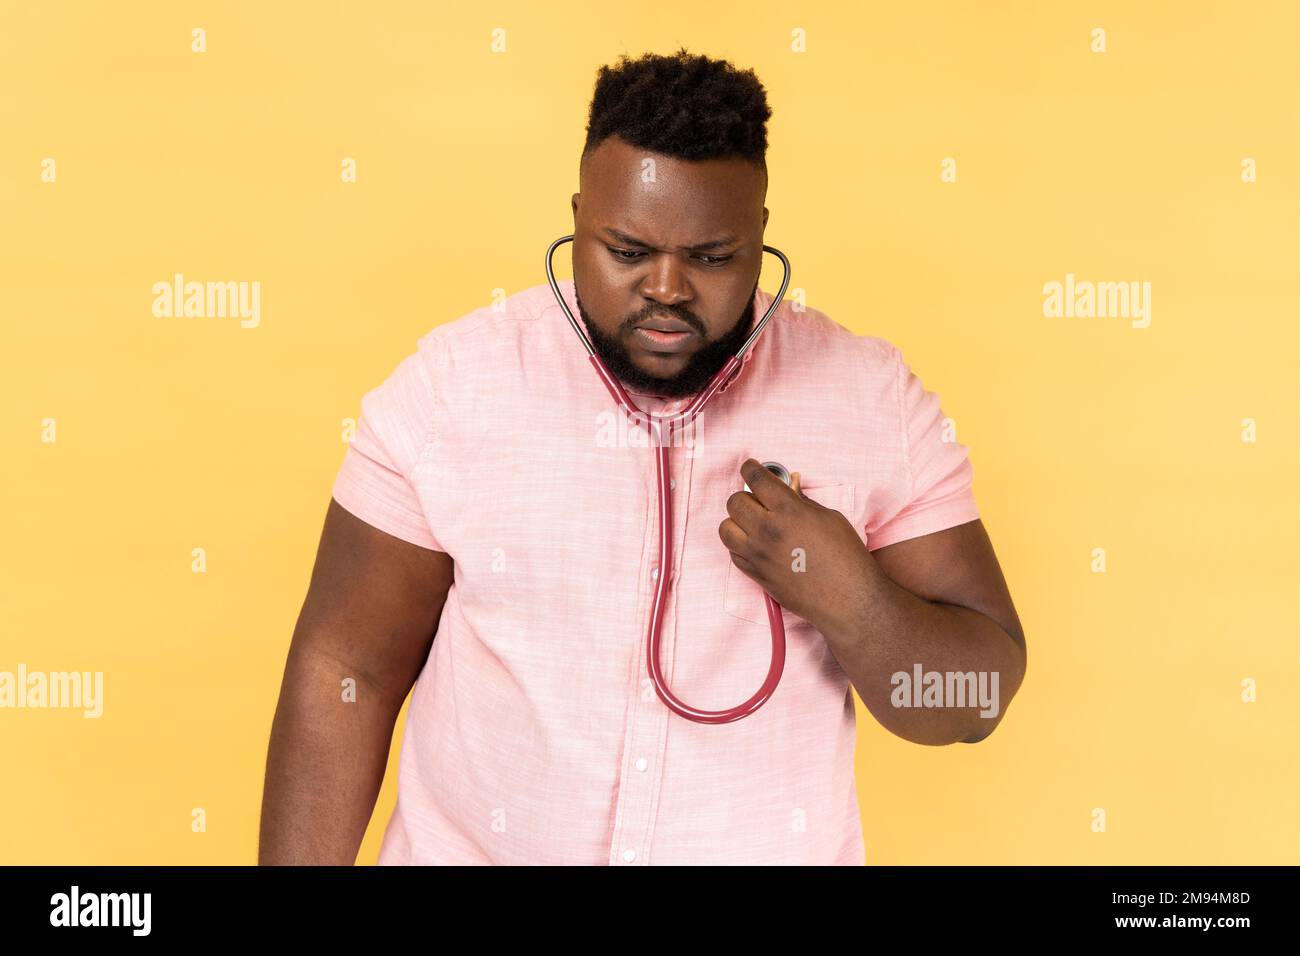 Portrait of concentrated bearded man wearing pink shirt standing with stethoscope, doing self examining of his heart, medicine concept. Indoor studio shot isolated on yellow background. Stock Photo